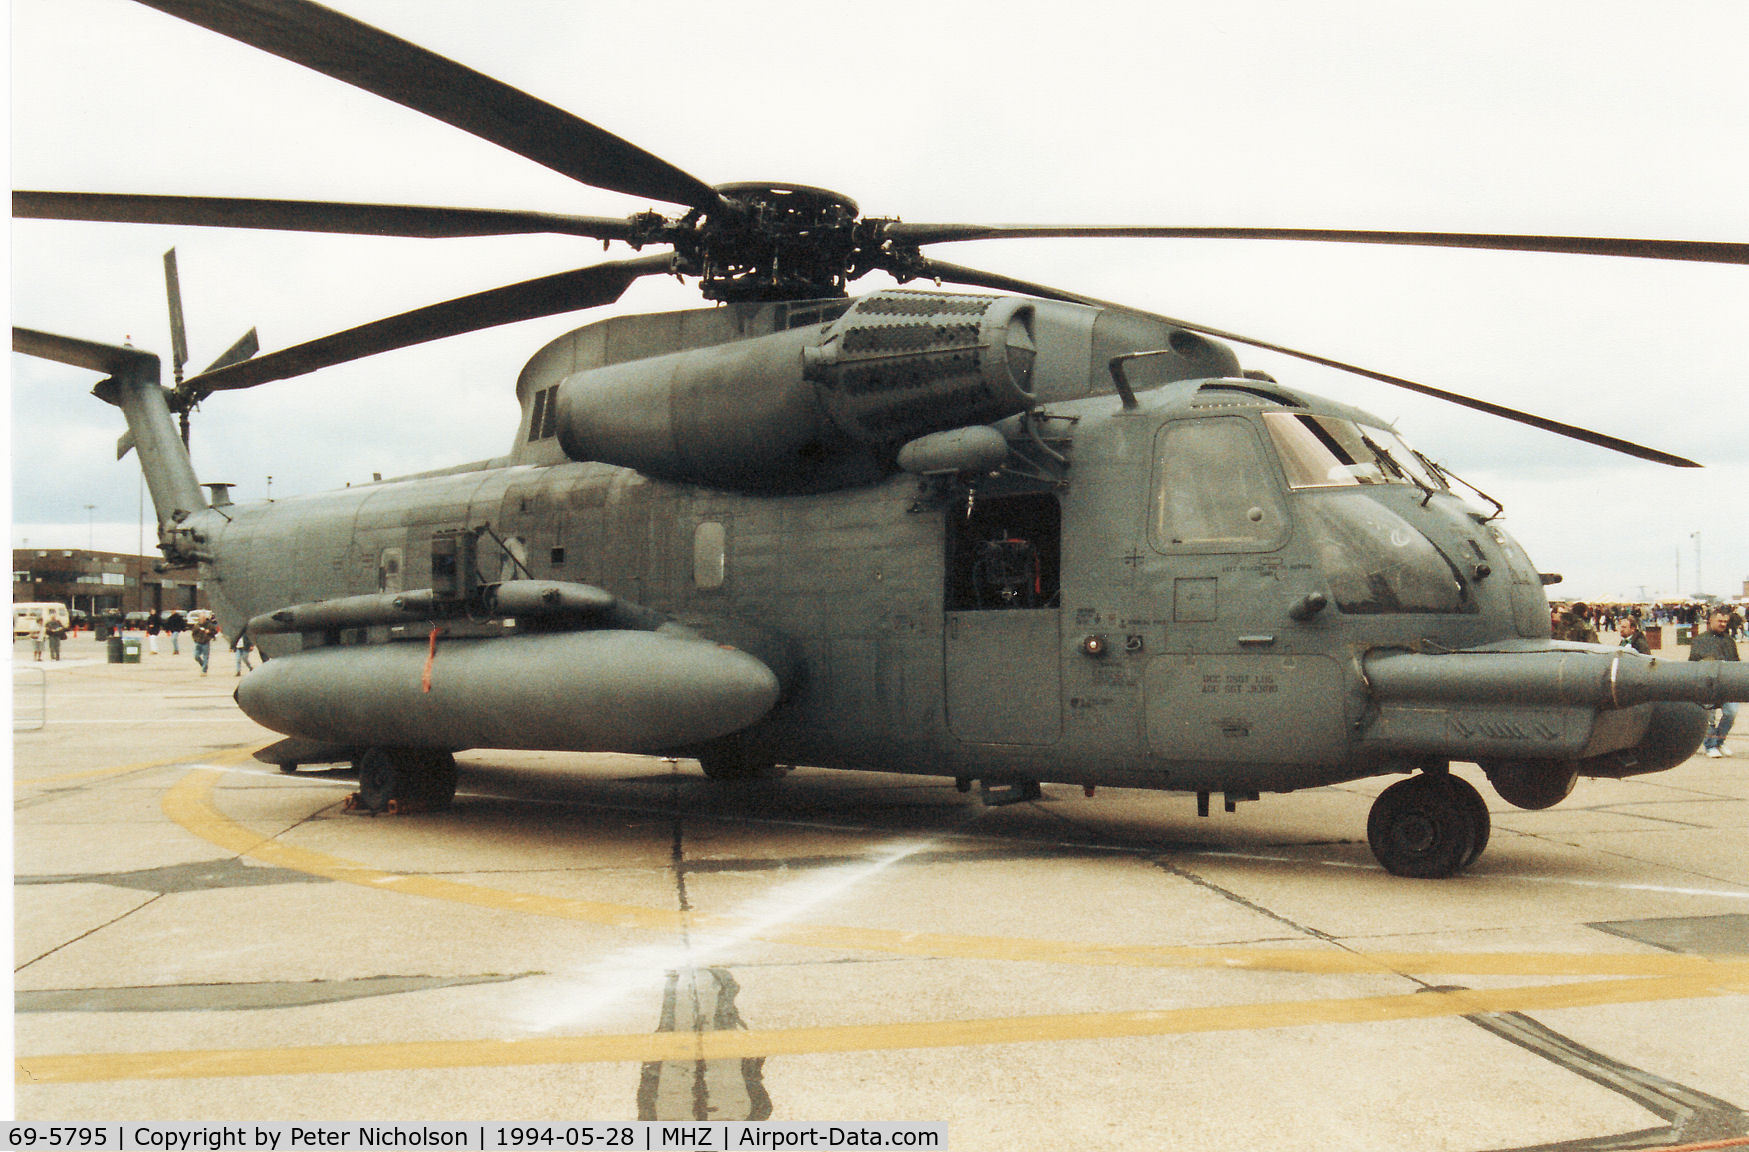 69-5795, 1969 Sikorsky MH-53J Pave Low III C/N 65-250, Pave Low III MH-53J of 21st Special Operations Squadron based at Mildenhall on display at the 1994 Mildenhall Air Fete.